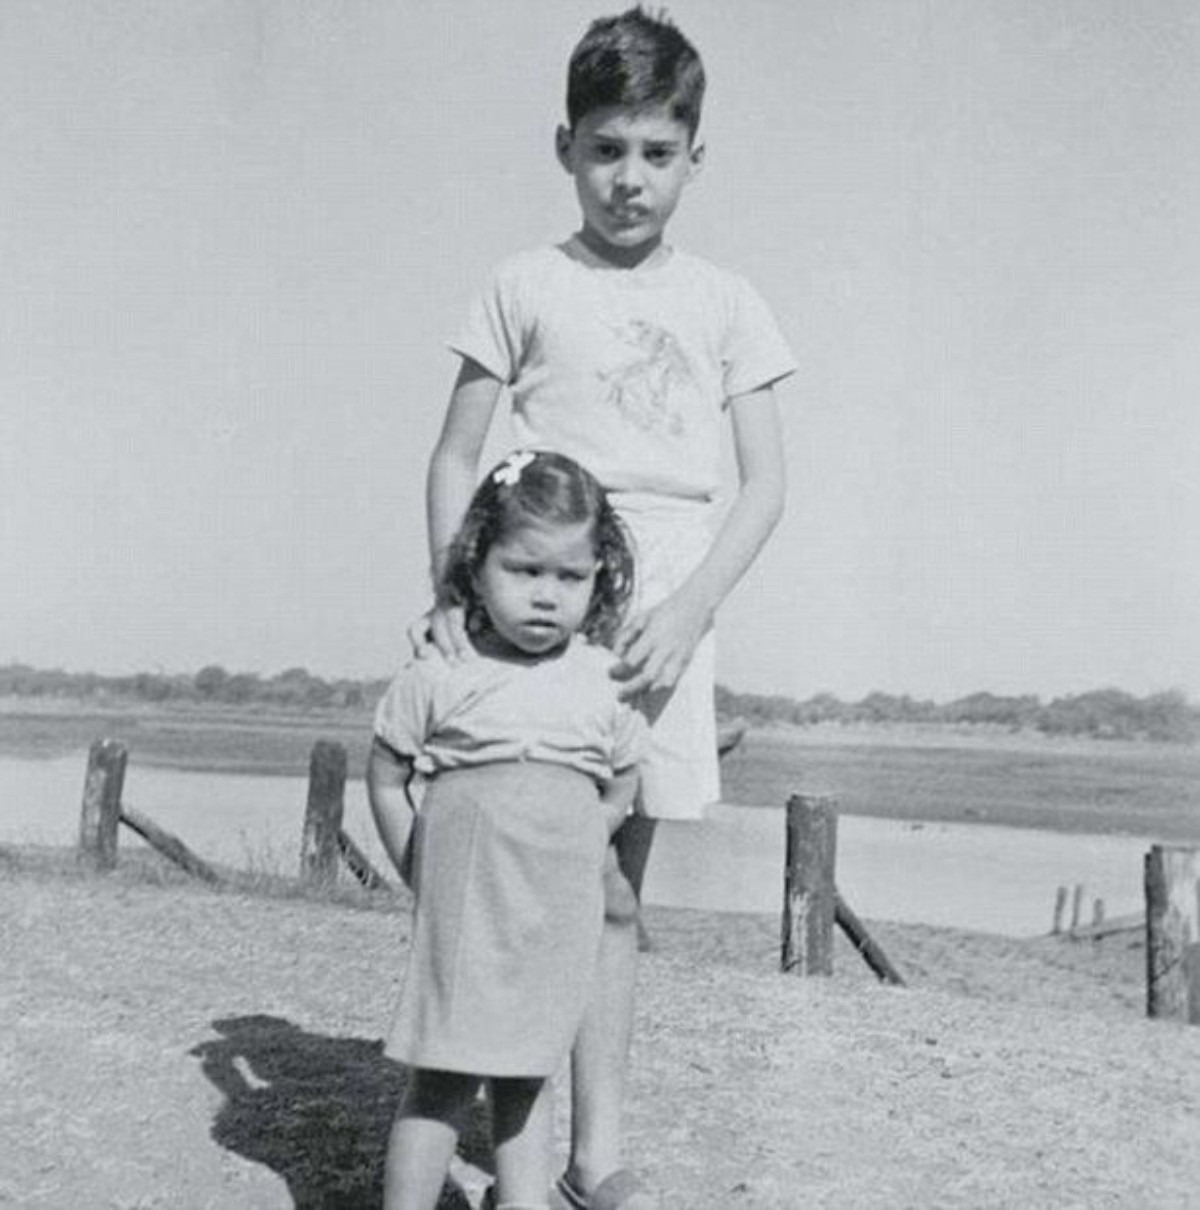 This photo of Kashmira and her brother Farrokh (later Freddie Mercury) is believed to have been taken around 1955